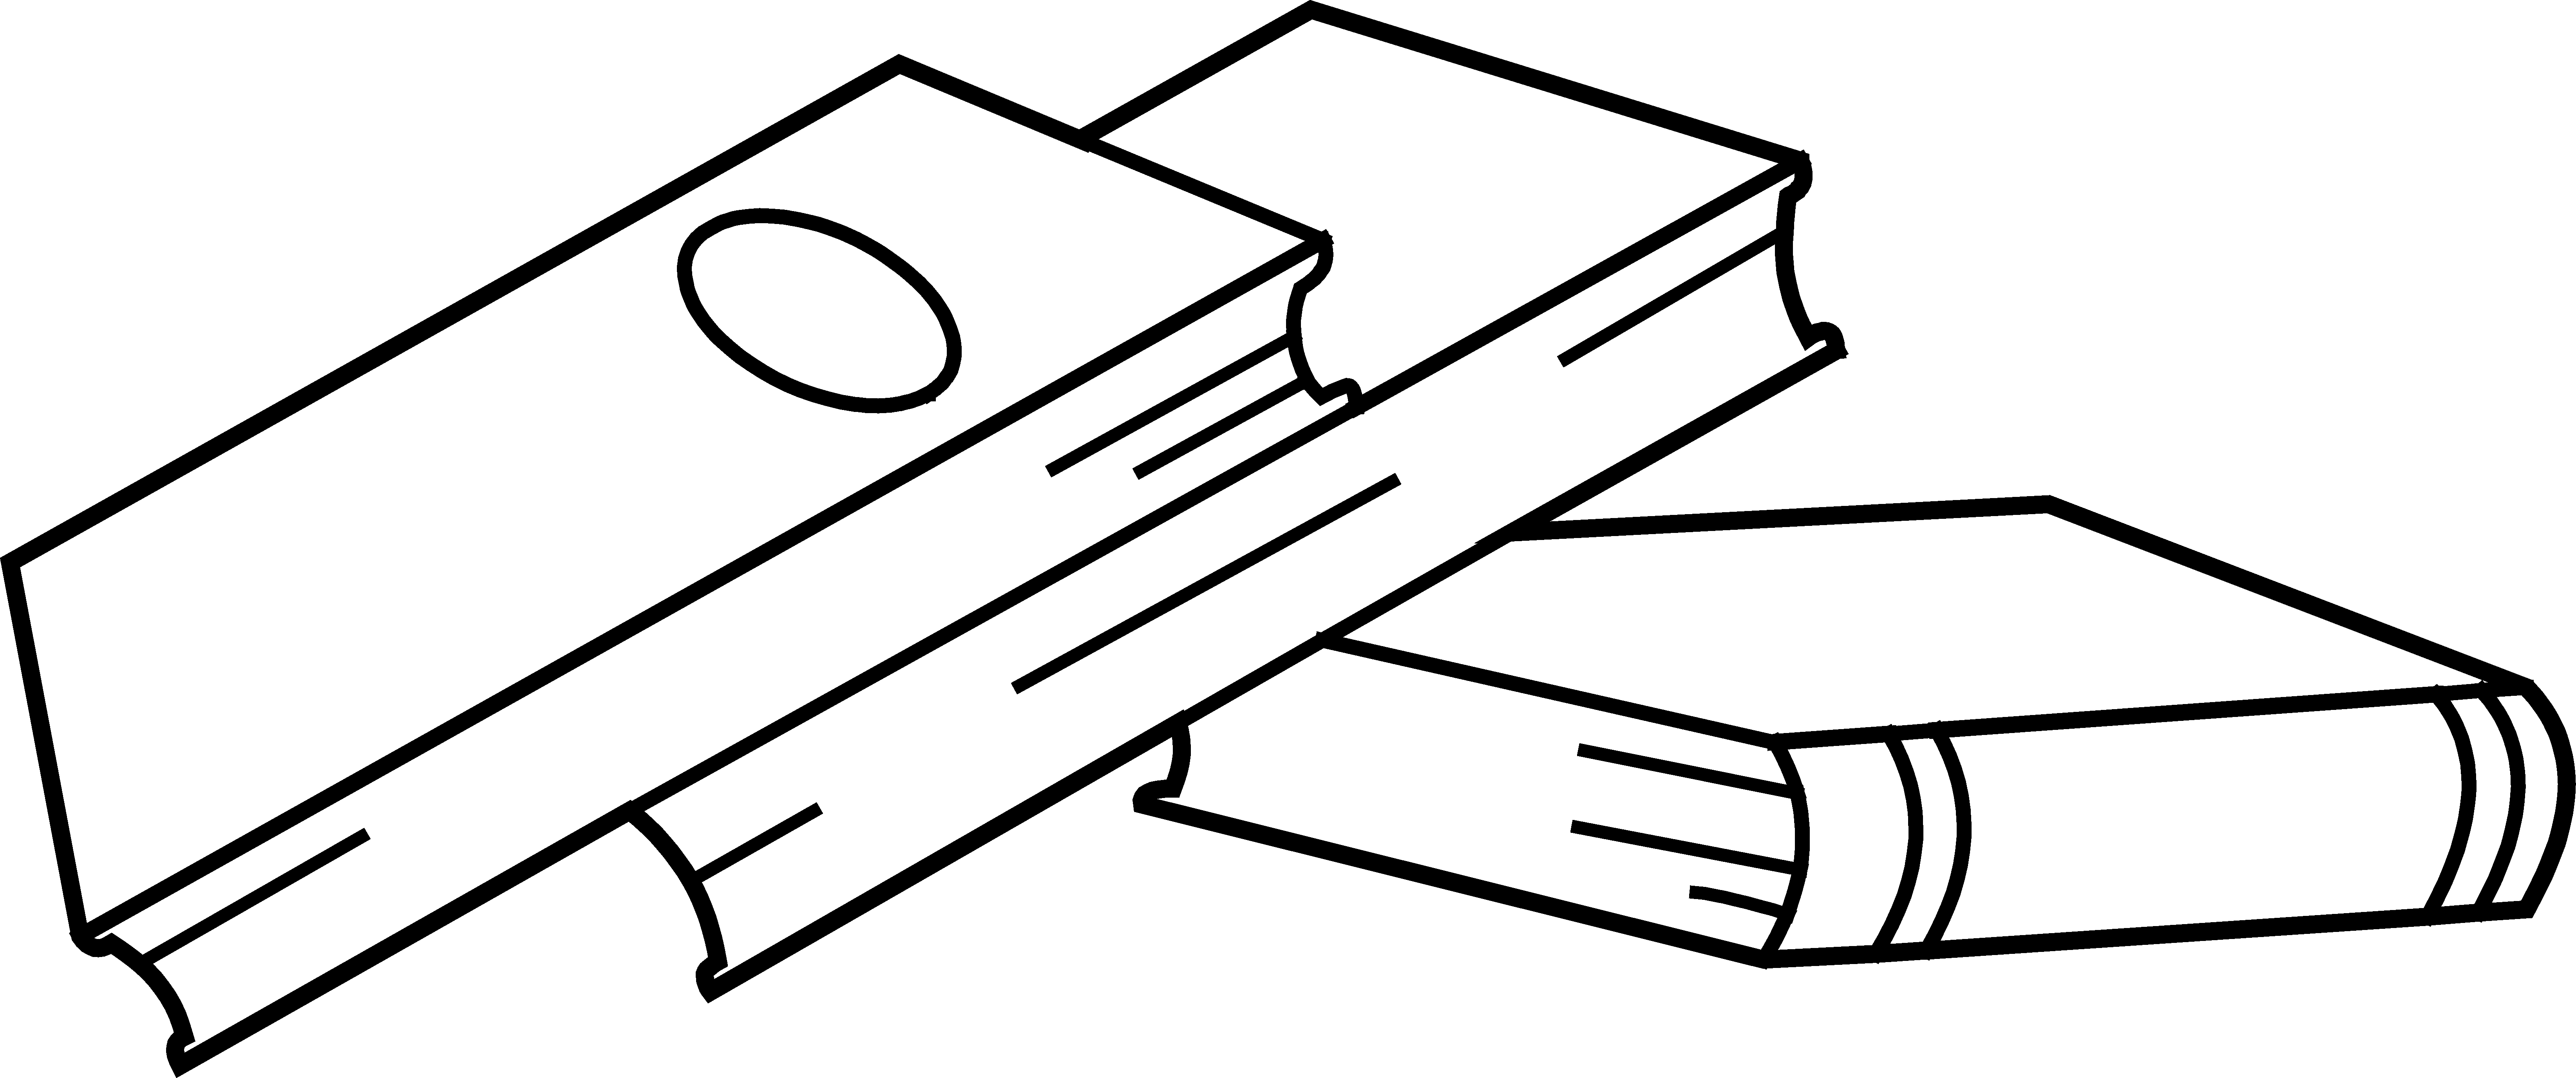 Stack of Books Coloring Page - Free Clip Art